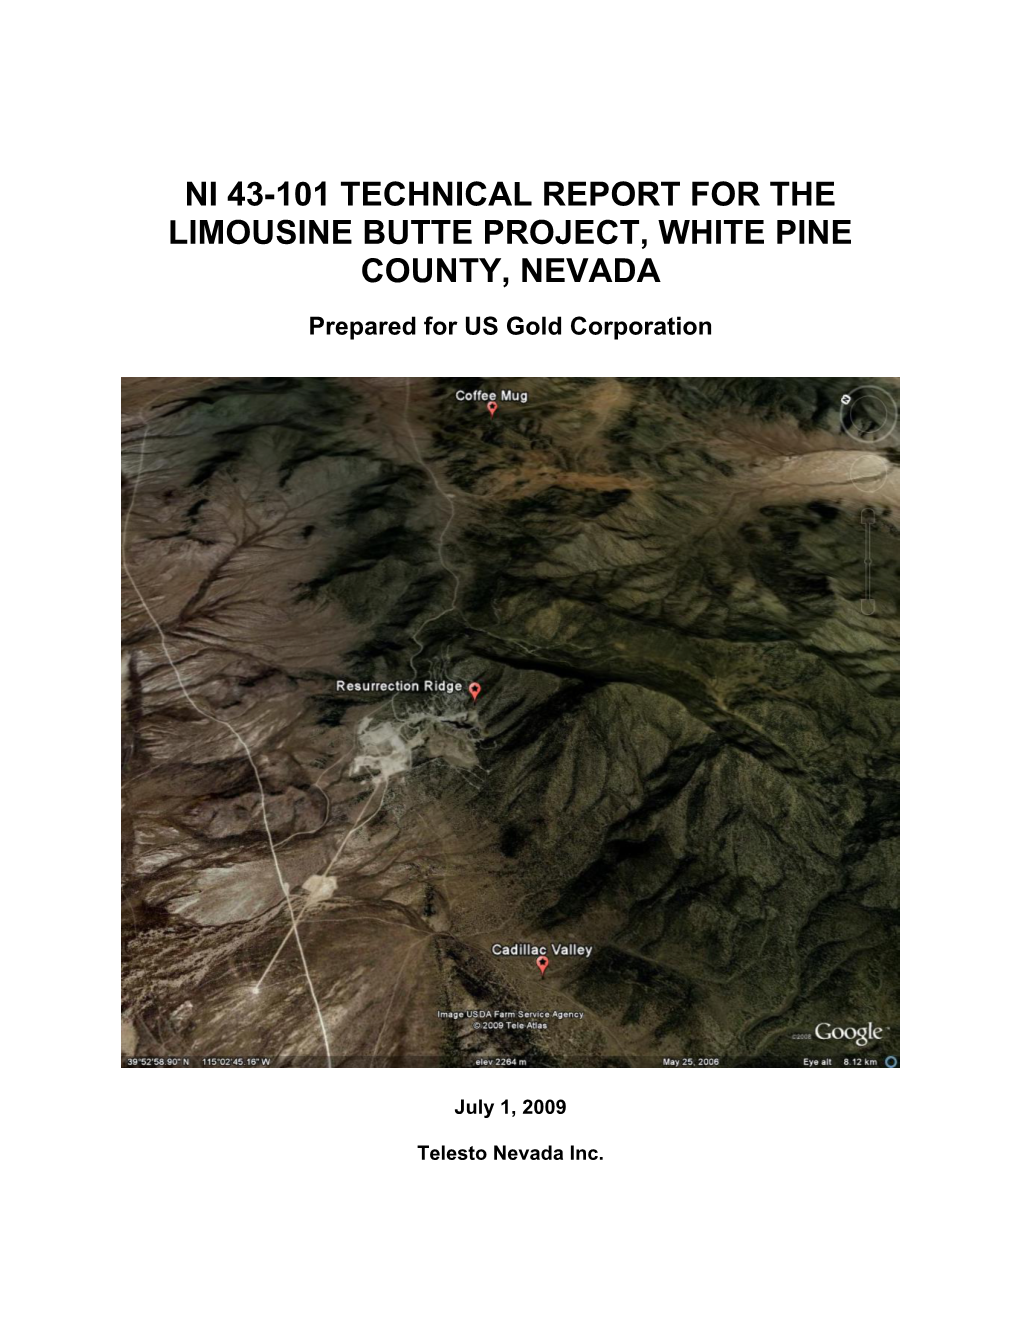 Ni 43-101 Technical Report for the Limousine Butte Project, White Pine County, Nevada